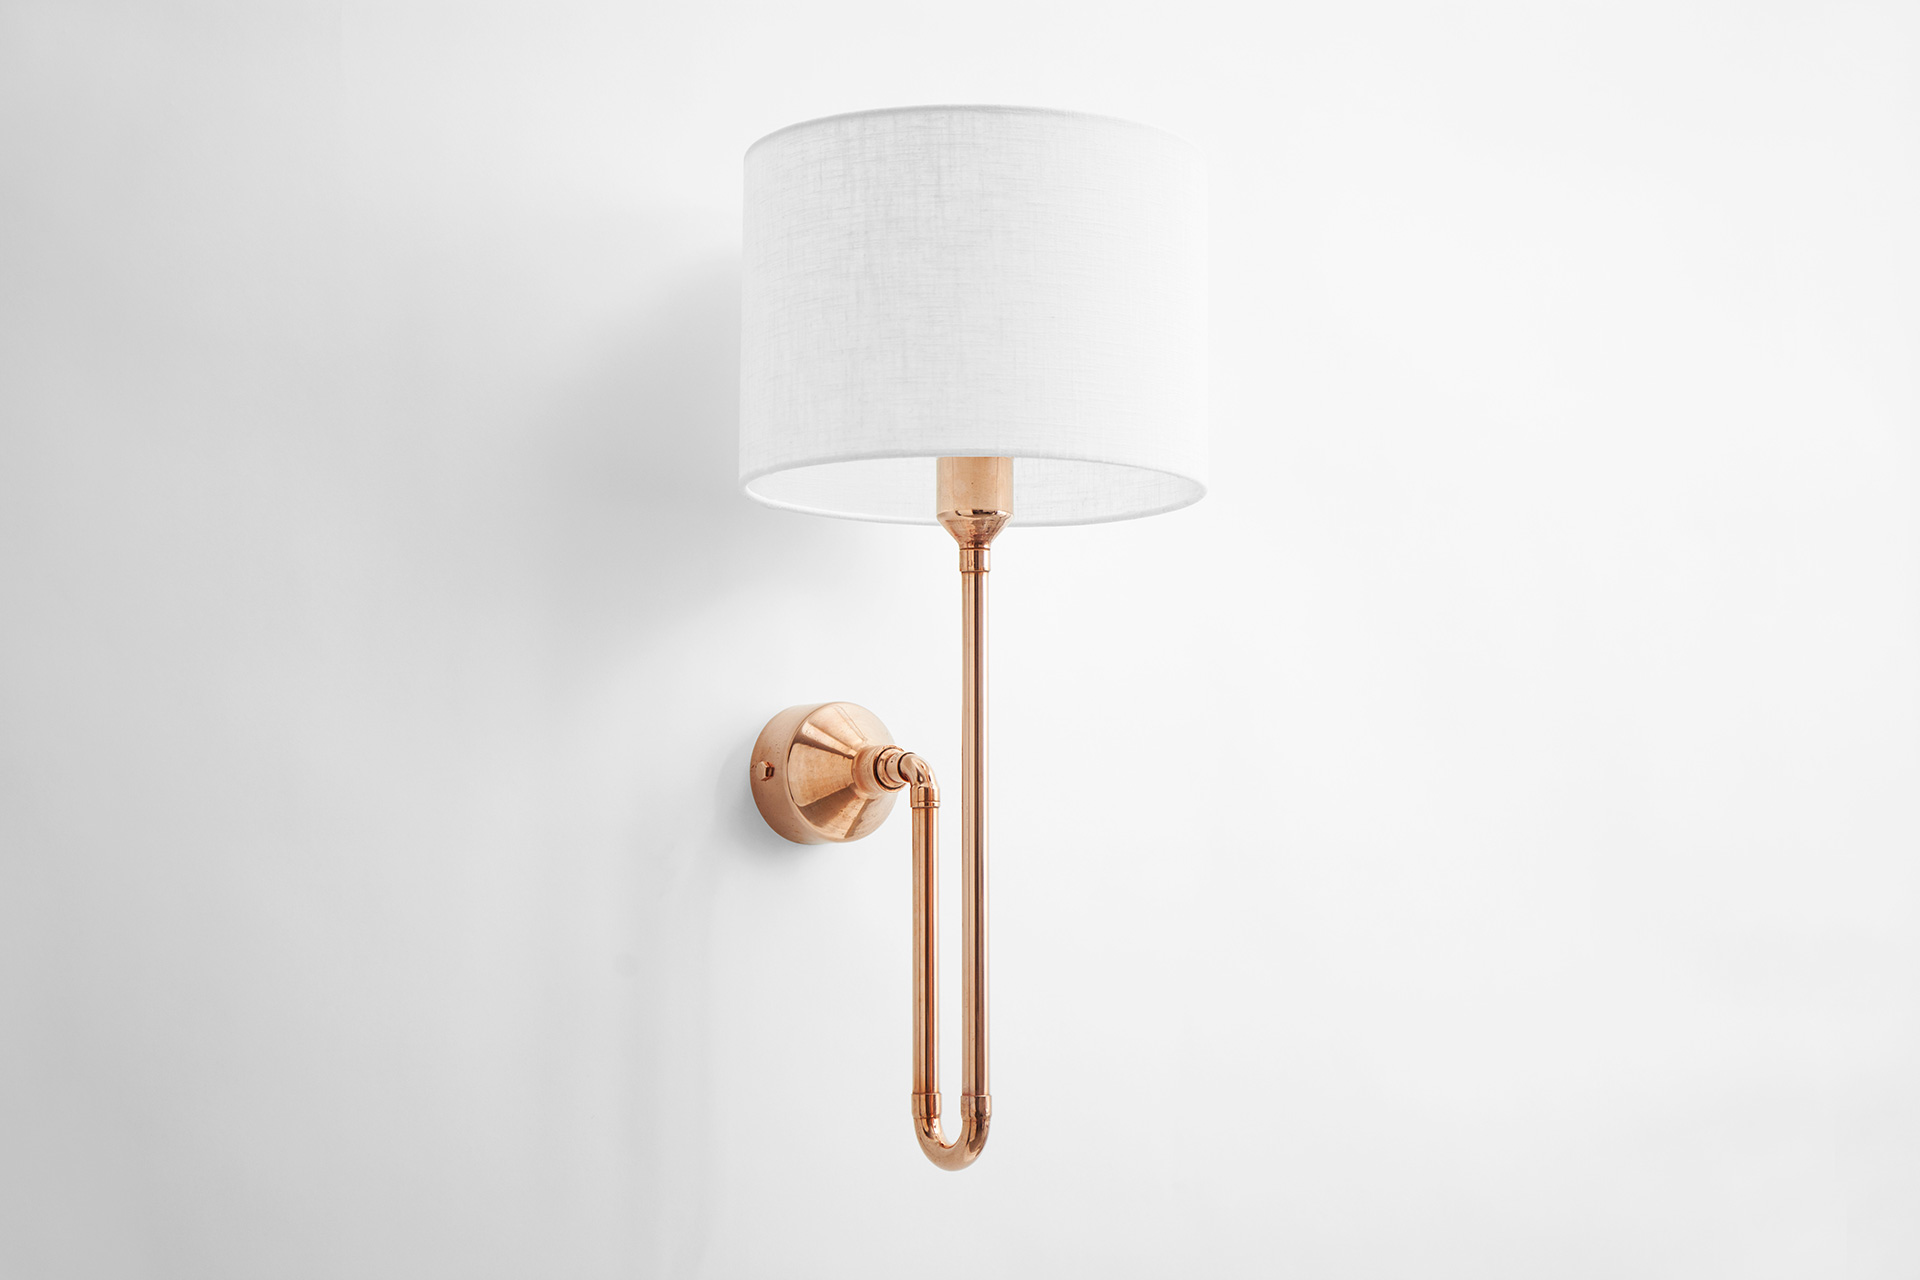 Designer conceptual wall lamp in pink copper metal finish with natural white linen shade in urban loft bedroom